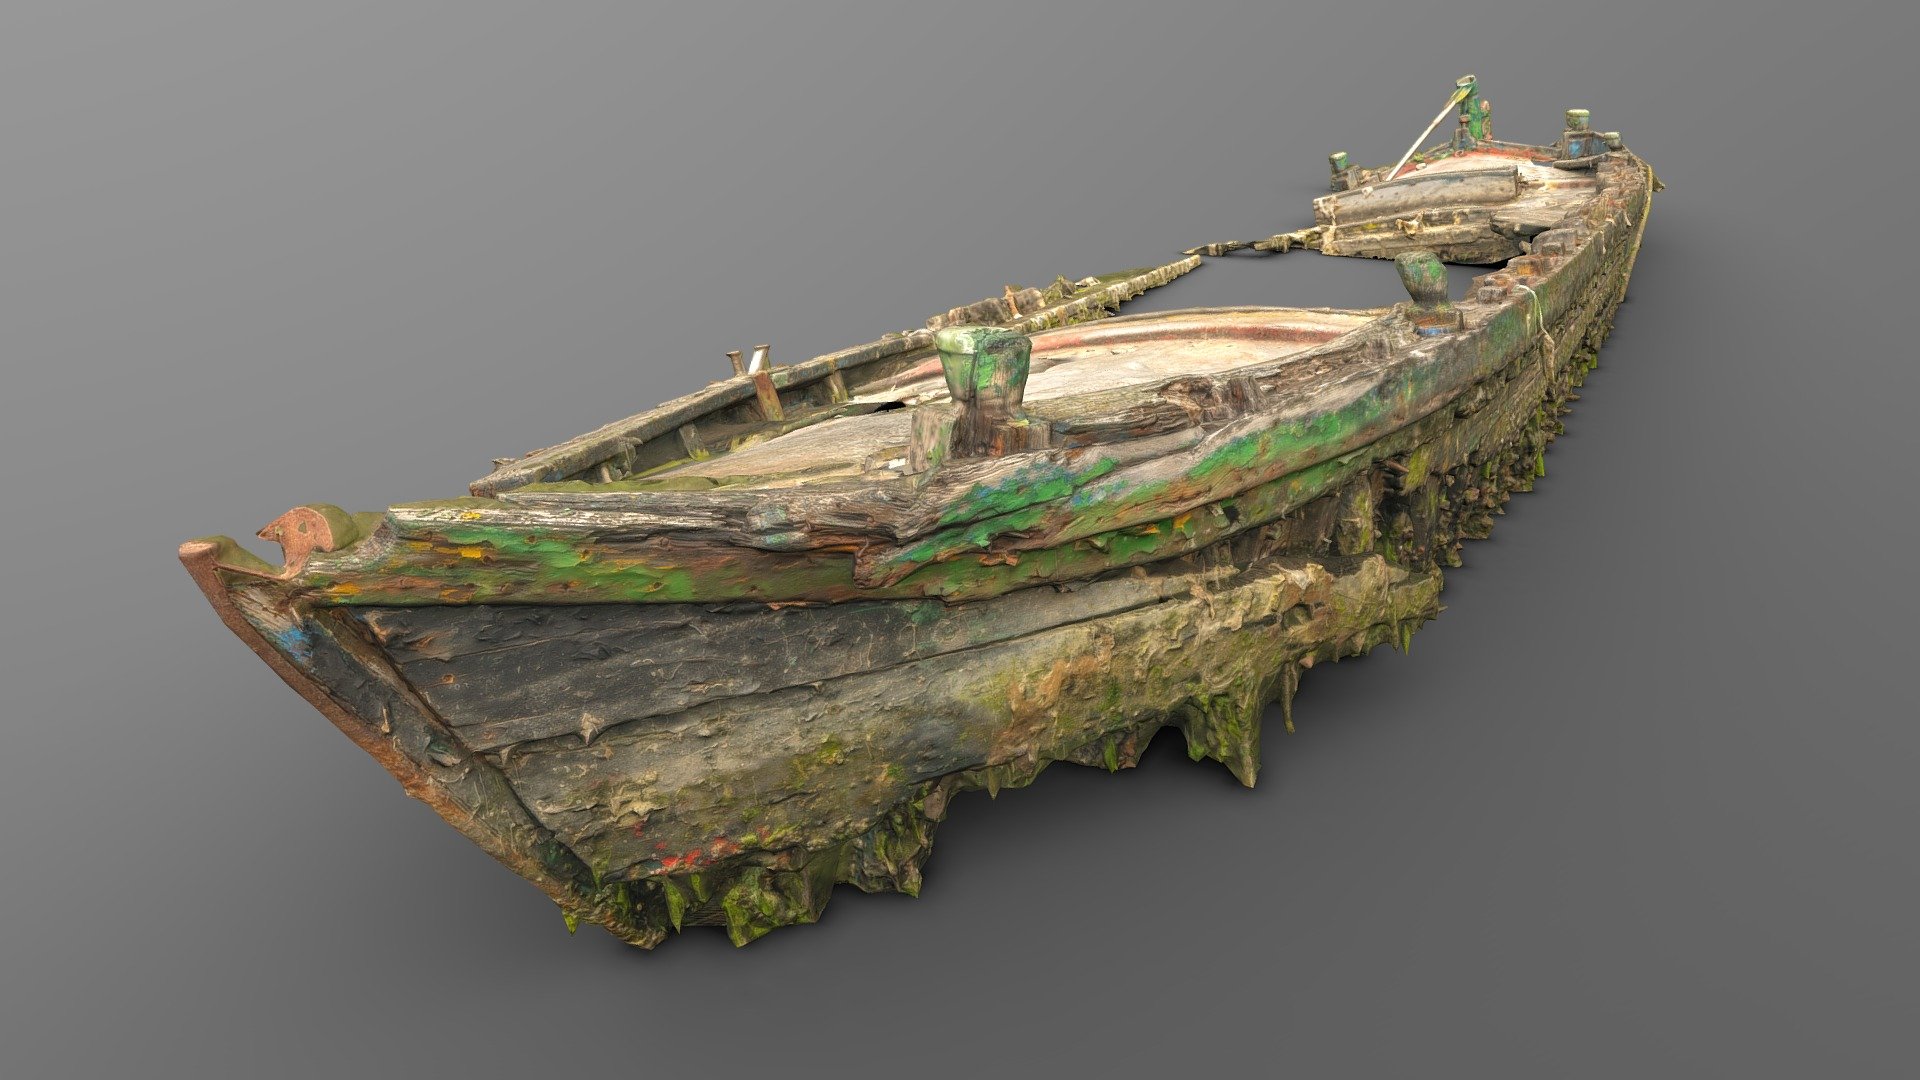 Super telephoto photogrammetry of a wreck abandoned boat derelict. Pealing chipping off layers of paint. Lots of seaweed and seashells from the lagoon of Venice.

Unfortunately I could't get full coverage because I coun't get very close to the subject, maybe 20m the closest, I could't get all the photos I wanted especially from  the top. This was one of times I wish I had a drone (not sure if it's even allowed to fly in that area anyway), so I tried my best with a 400mm lens handheld from any place I could walk around it.

I managed anyway to get comfortably 3x8K textures and normals in a relatively low poly model.

Maybe if I find the right conditions again (low tide and good light) I could try to reshoot this one, maybe from a boat&hellip; stay tuned for a possible reupload 3d model